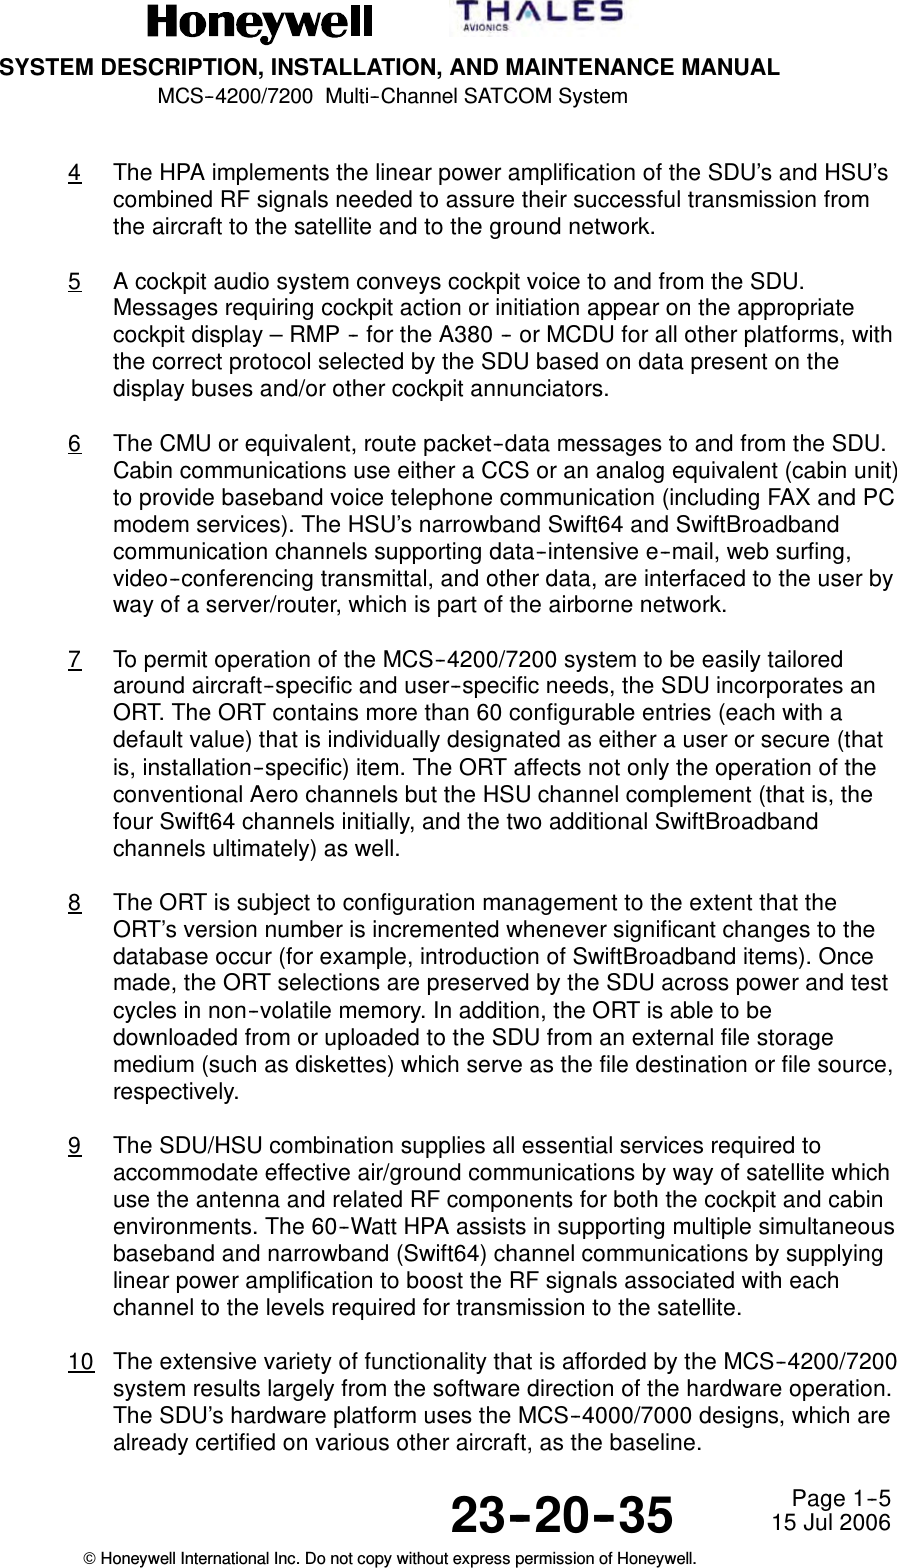 SYSTEM DESCRIPTION, INSTALLATION, AND MAINTENANCE MANUALMCS--4200/7200 Multi--Channel SATCOM System23--20--35 15 Jul 2006Honeywell International Inc. Do not copy without express permission of Honeywell.Page 1--54The HPA implements the linear power amplification of the SDU’s and HSU’scombined RF signals needed to assure their successful transmission fromthe aircraft to the satellite and to the ground network.5A cockpit audio system conveys cockpit voice to and from the SDU.Messages requiring cockpit action or initiation appear on the appropriatecockpit display – RMP -- for the A380 -- or MCDU for all other platforms, withthe correct protocol selected by the SDU based on data present on thedisplay buses and/or other cockpit annunciators.6The CMU or equivalent, route packet--data messages to and from the SDU.Cabin communications use either a CCS or an analog equivalent (cabin unit)to provide baseband voice telephone communication (including FAX and PCmodem services). The HSU’s narrowband Swift64 and SwiftBroadbandcommunication channels supporting data--intensive e--mail, web surfing,video--conferencing transmittal, and other data, are interfaced to the user byway of a server/router, which is part of the airborne network.7To permit operation of the MCS--4200/7200 system to be easily tailoredaround aircraft--specific and user--specific needs, the SDU incorporates anORT. The ORT contains more than 60 configurable entries (each with adefault value) that is individually designated as either a user or secure (thatis, installation--specific) item. The ORT affects not only the operation of theconventional Aero channels but the HSU channel complement (that is, thefour Swift64 channels initially, and the two additional SwiftBroadbandchannels ultimately) as well.8The ORT is subject to configuration management to the extent that theORT’s version number is incremented whenever significant changes to thedatabase occur (for example, introduction of SwiftBroadband items). Oncemade, the ORT selections are preserved by the SDU across power and testcycles in non--volatile memory. In addition, the ORT is able to bedownloaded from or uploaded to the SDU from an external file storagemedium (such as diskettes) which serve as the file destination or file source,respectively.9The SDU/HSU combination supplies all essential services required toaccommodate effective air/ground communications by way of satellite whichuse the antenna and related RF components for both the cockpit and cabinenvironments. The 60--Watt HPA assists in supporting multiple simultaneousbaseband and narrowband (Swift64) channel communications by supplyinglinear power amplification to boost the RF signals associated with eachchannel to the levels required for transmission to the satellite.10 The extensive variety of functionality that is afforded by the MCS--4200/7200system results largely from the software direction of the hardware operation.The SDU’s hardware platform uses the MCS--4000/7000 designs, which arealready certified on various other aircraft, as the baseline.